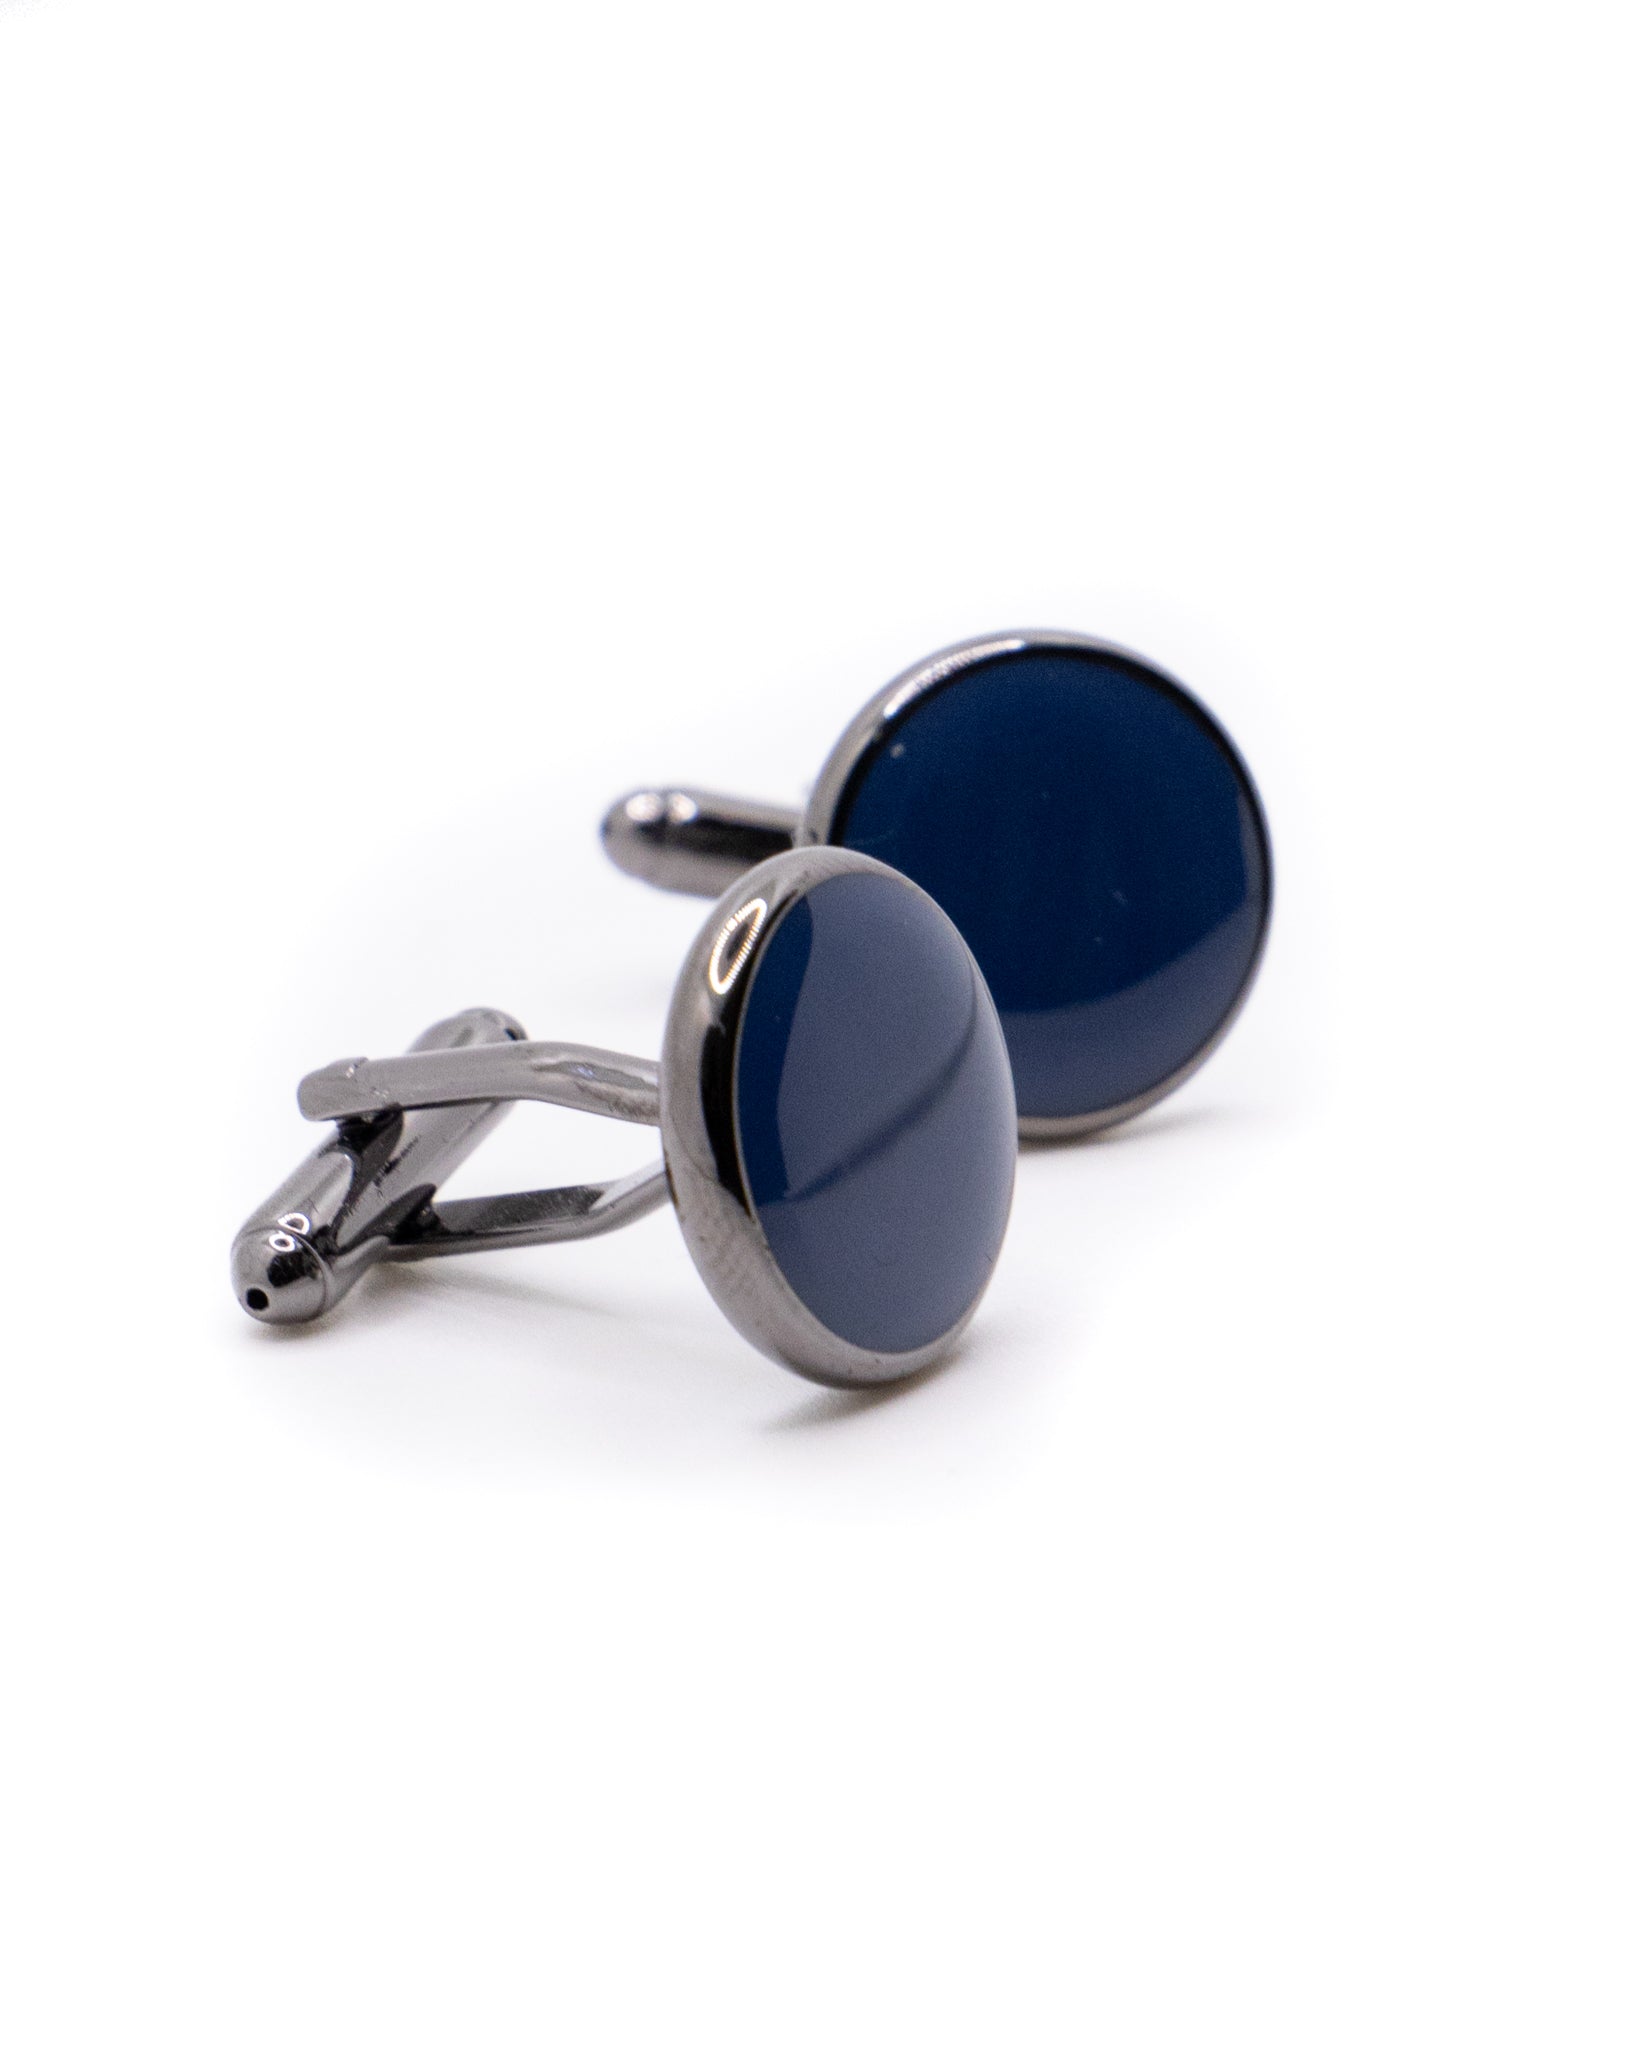 Ludovisi - silver and blue cufflinks